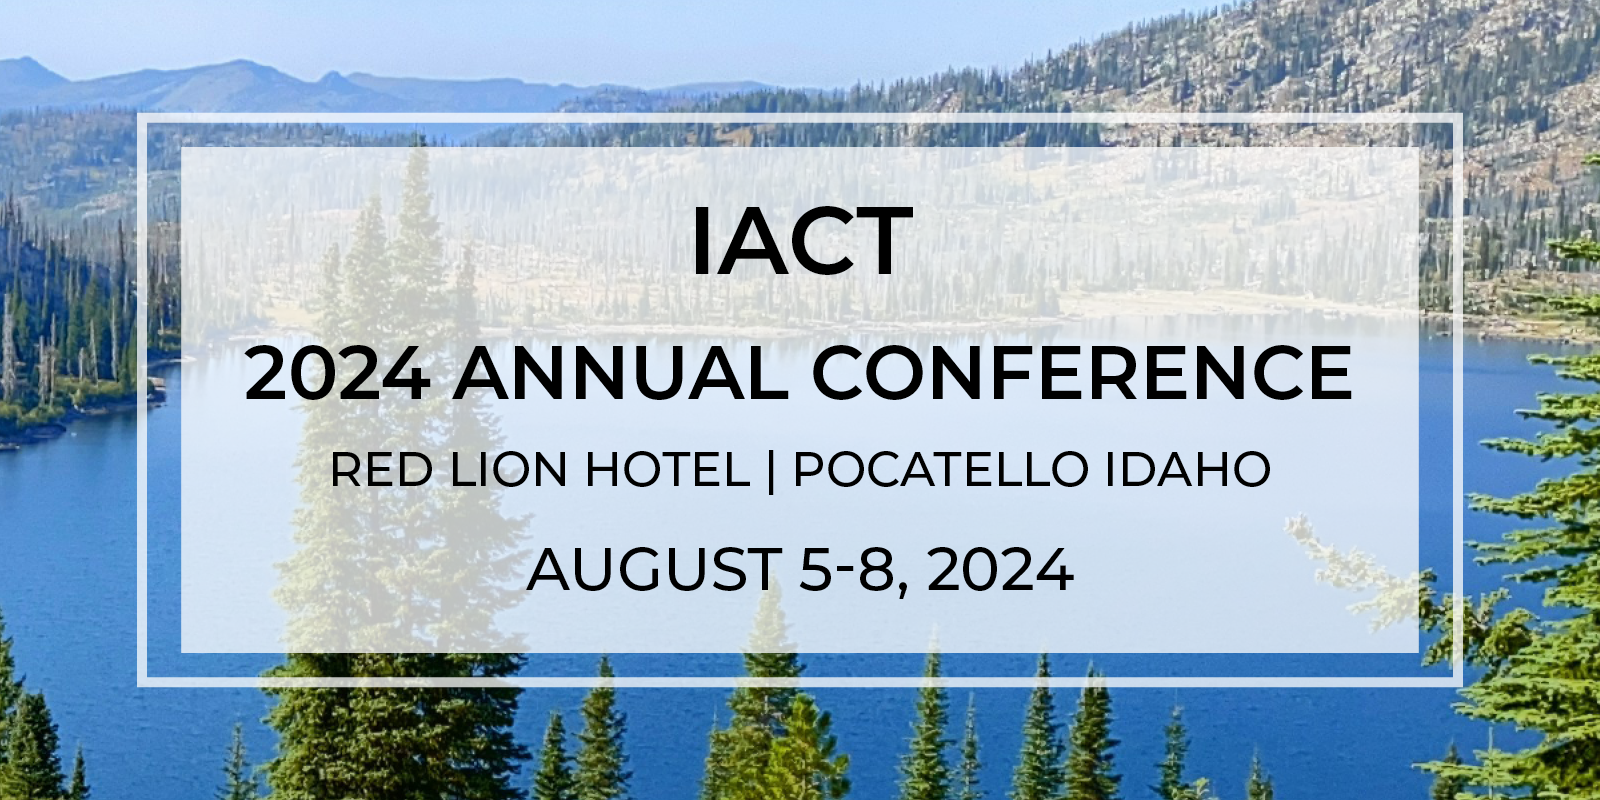 IACT Annual Conference